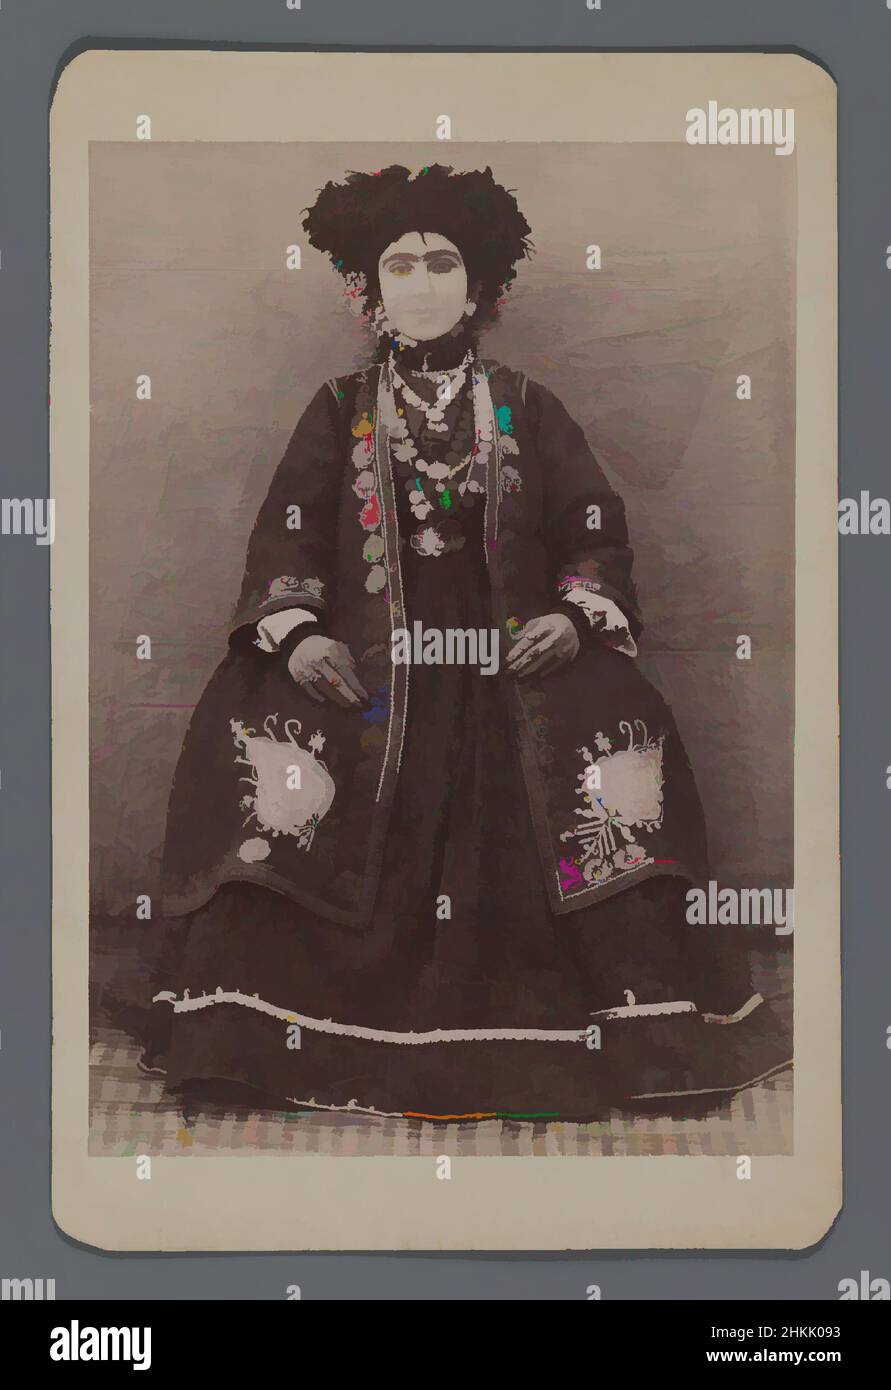 Art inspired by Female Member of a Tribal Khan's Family, One of 274 Vintage Photographs, Albumen silver photograph, late 19th-early 20th century, Qajar, Qajar Period, photo: 5 1/2 x 3 13/16 in., 14.0 x 9.7 cm, Classic works modernized by Artotop with a splash of modernity. Shapes, color and value, eye-catching visual impact on art. Emotions through freedom of artworks in a contemporary way. A timeless message pursuing a wildly creative new direction. Artists turning to the digital medium and creating the Artotop NFT Stock Photo